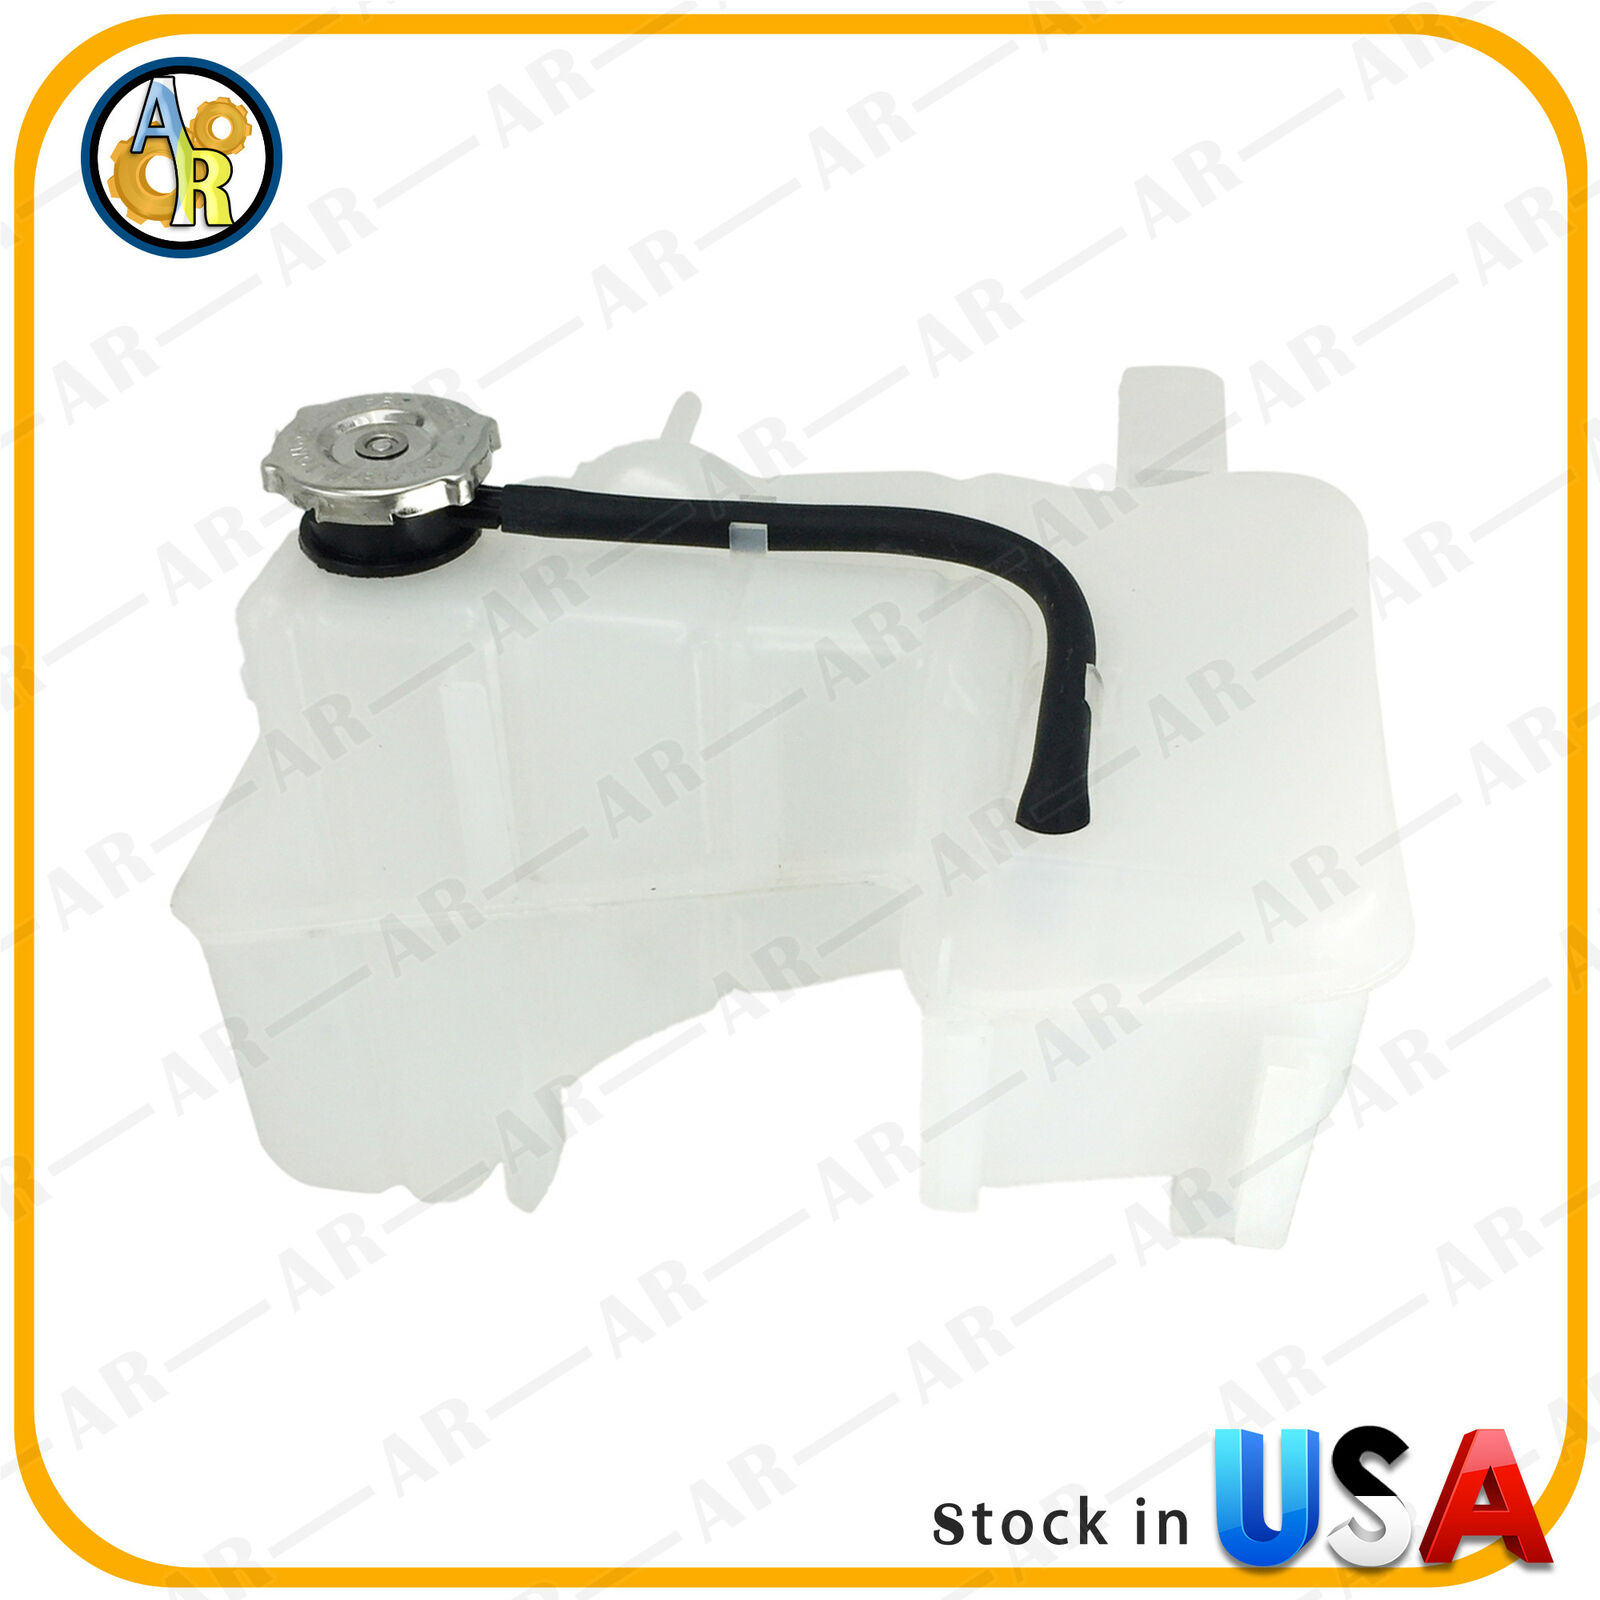 Radiator Coolant Recovery Tank Reservoir For Dodge Magnum Charger Chrysler 300